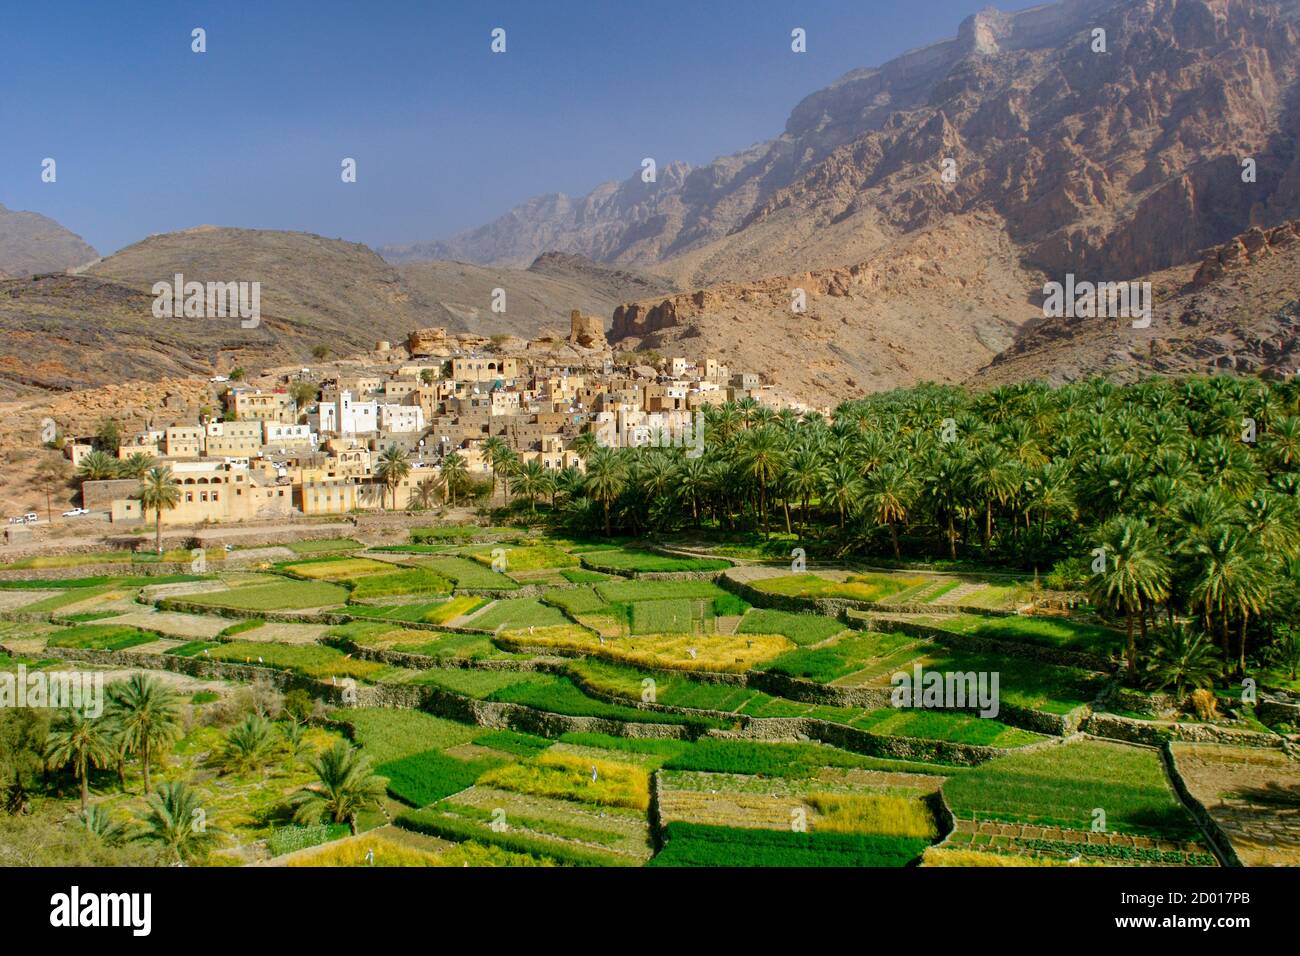 The village of Bilad Seet and its plantations in Wadi Bani Auf in the Jebel Akhdar mountains of Oman. Stock Photo